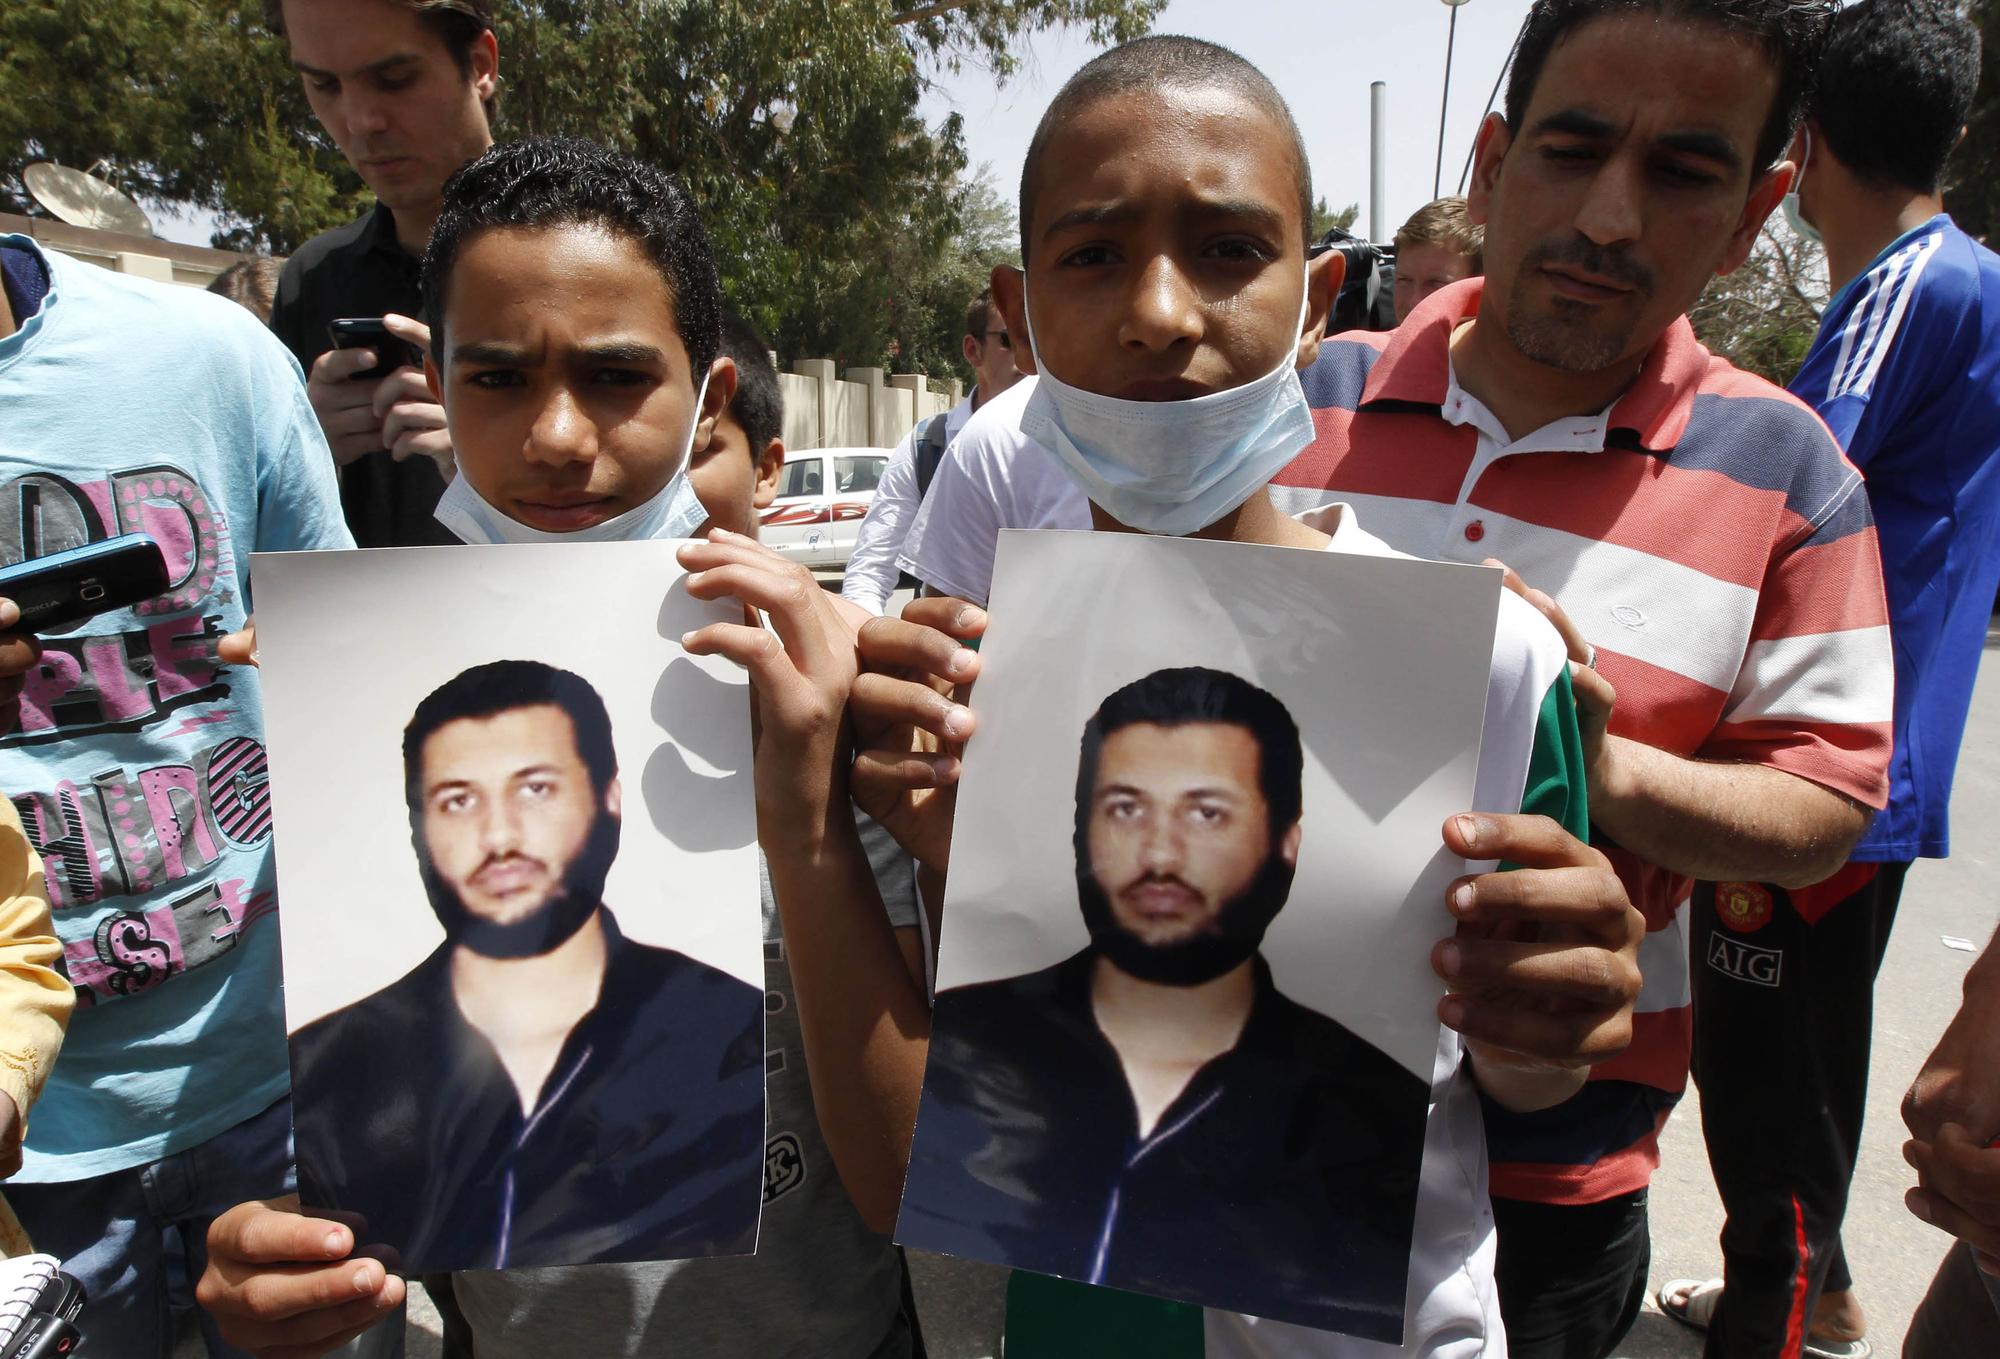 Young men hold pictures of Saif Al-Arab Gaddafi, son of Libyan leader Muammar Gaddafi, in Tripoli May 1, 2011. Libya said on Sunday Muammar Gaddafi's youngest son Saif Al-Arab and three grandchildren were killed in a NATO air strike and Britain said that while it was not targeting the leader, it was homing in on his military machine. Libyan government spokesman Mussa Ibrahim said Gaddafi was unharmed and in good health despite what he called "a direct operation to assassinate the leader of this country". The deaths have not been independently confirmed. REUTERS/Louafi Larbi [REUTERS - Louafi Larbi]